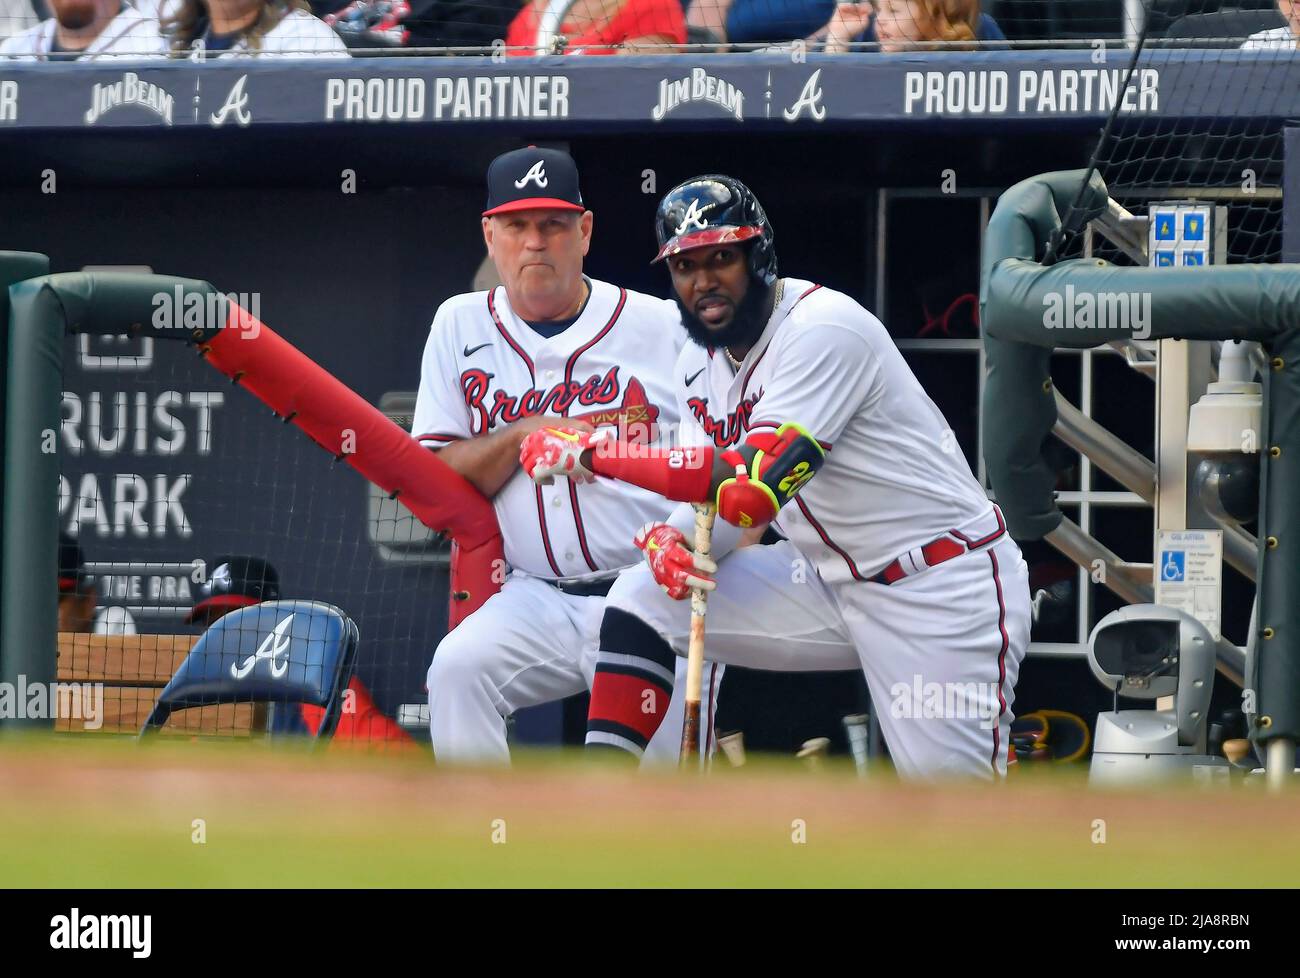 Atlanta, GA, USA. 28th May, 2022. Atlanta Braves manager Brian Snitker  (left) and outfielder Marcell Ozuna (right) watch from the dugout during  the ninth inning of a MLB game against the Miami